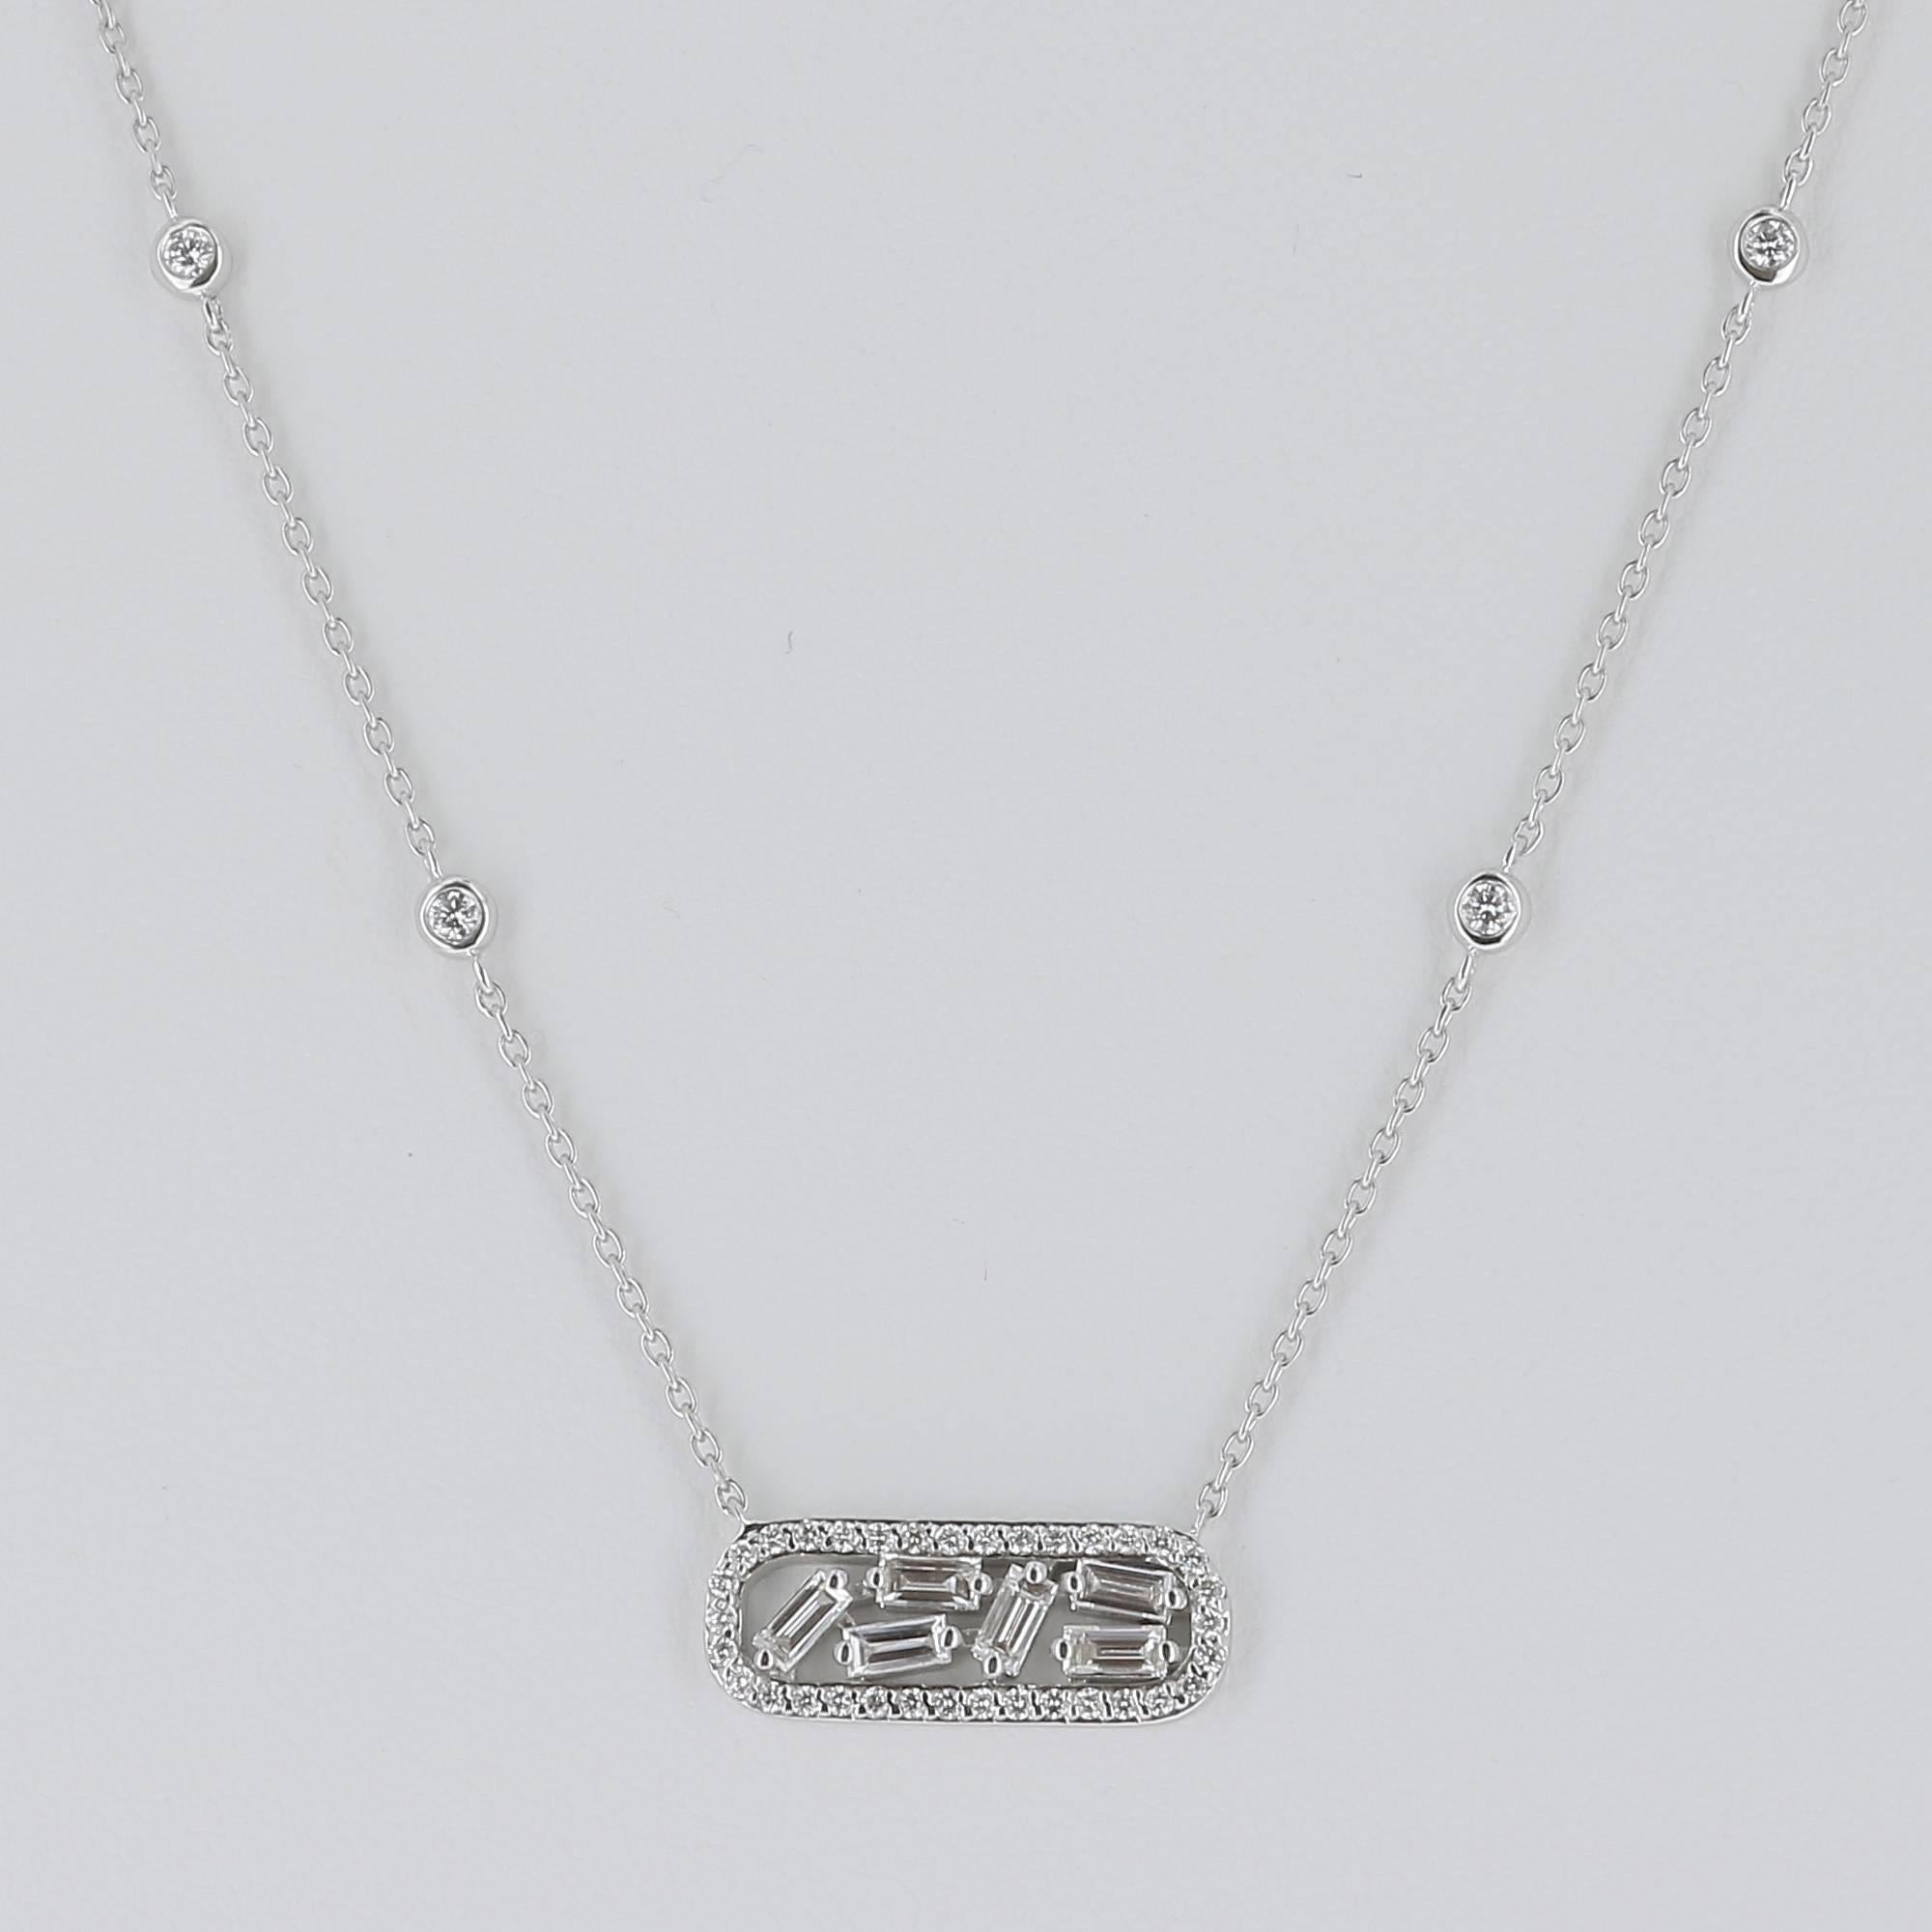 6 baguettes diamonds surrounded by an oval ring set with brilliants
Hanging pendant with a chain adorned with 4 diamonds measuring 43 cm for a total weight of 0.62 carats
The Diamonds quality is GVS
The chain is in 18K White Gold
